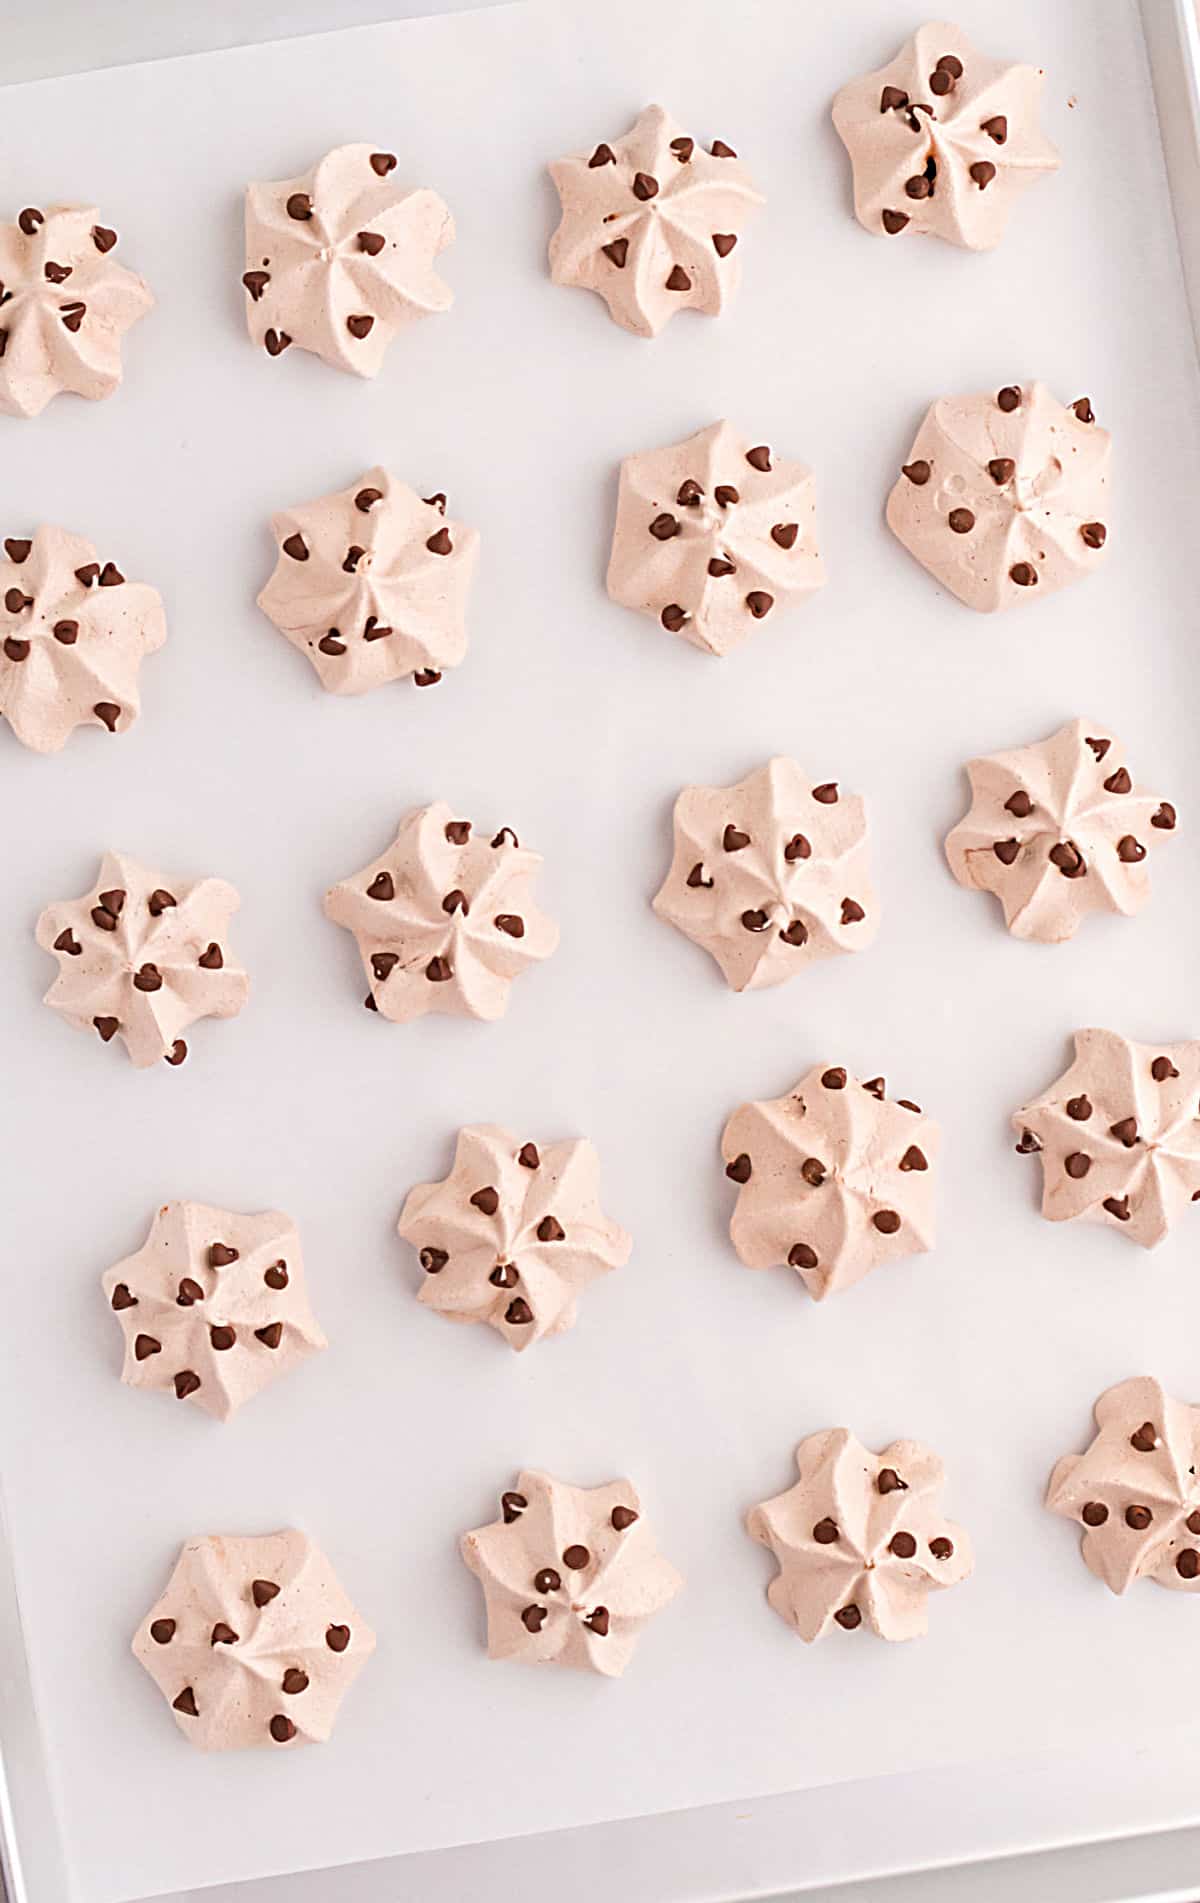 Chocolate meringue cookies with chocolate chips on parchment paper lined cookie sheet.